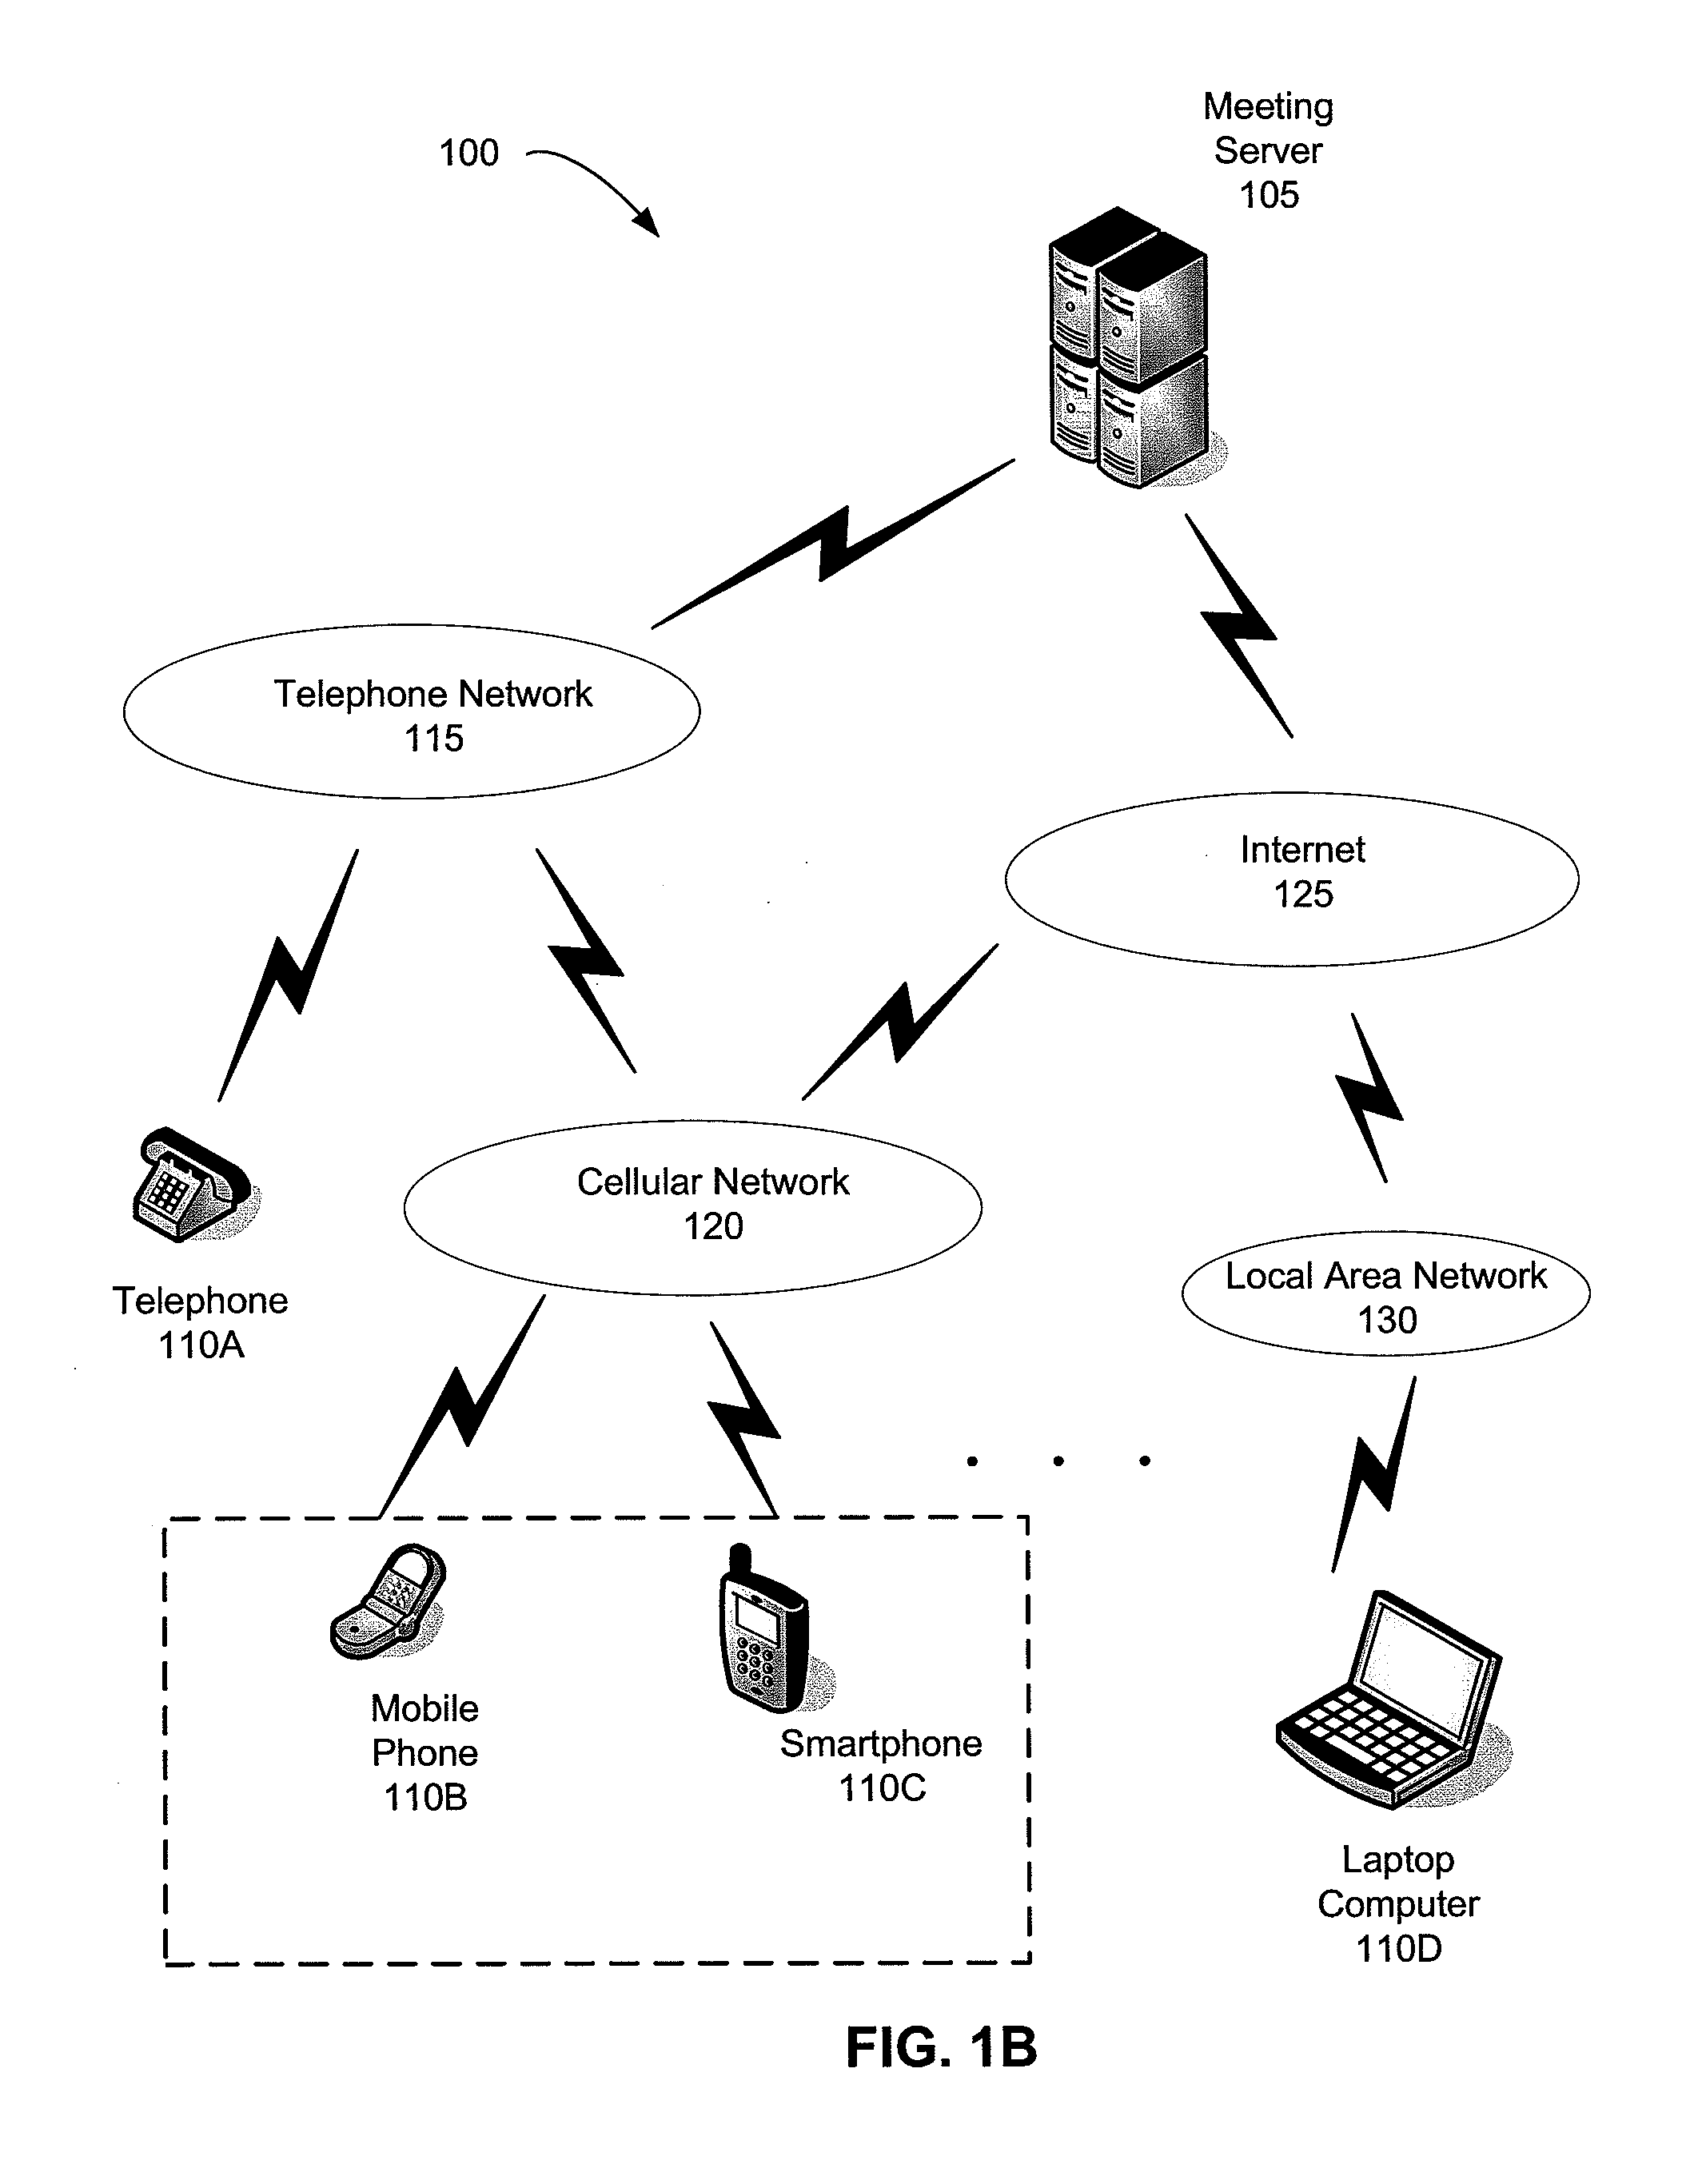 Systems and methods for receiving and processing audio signals captured using multiple devices